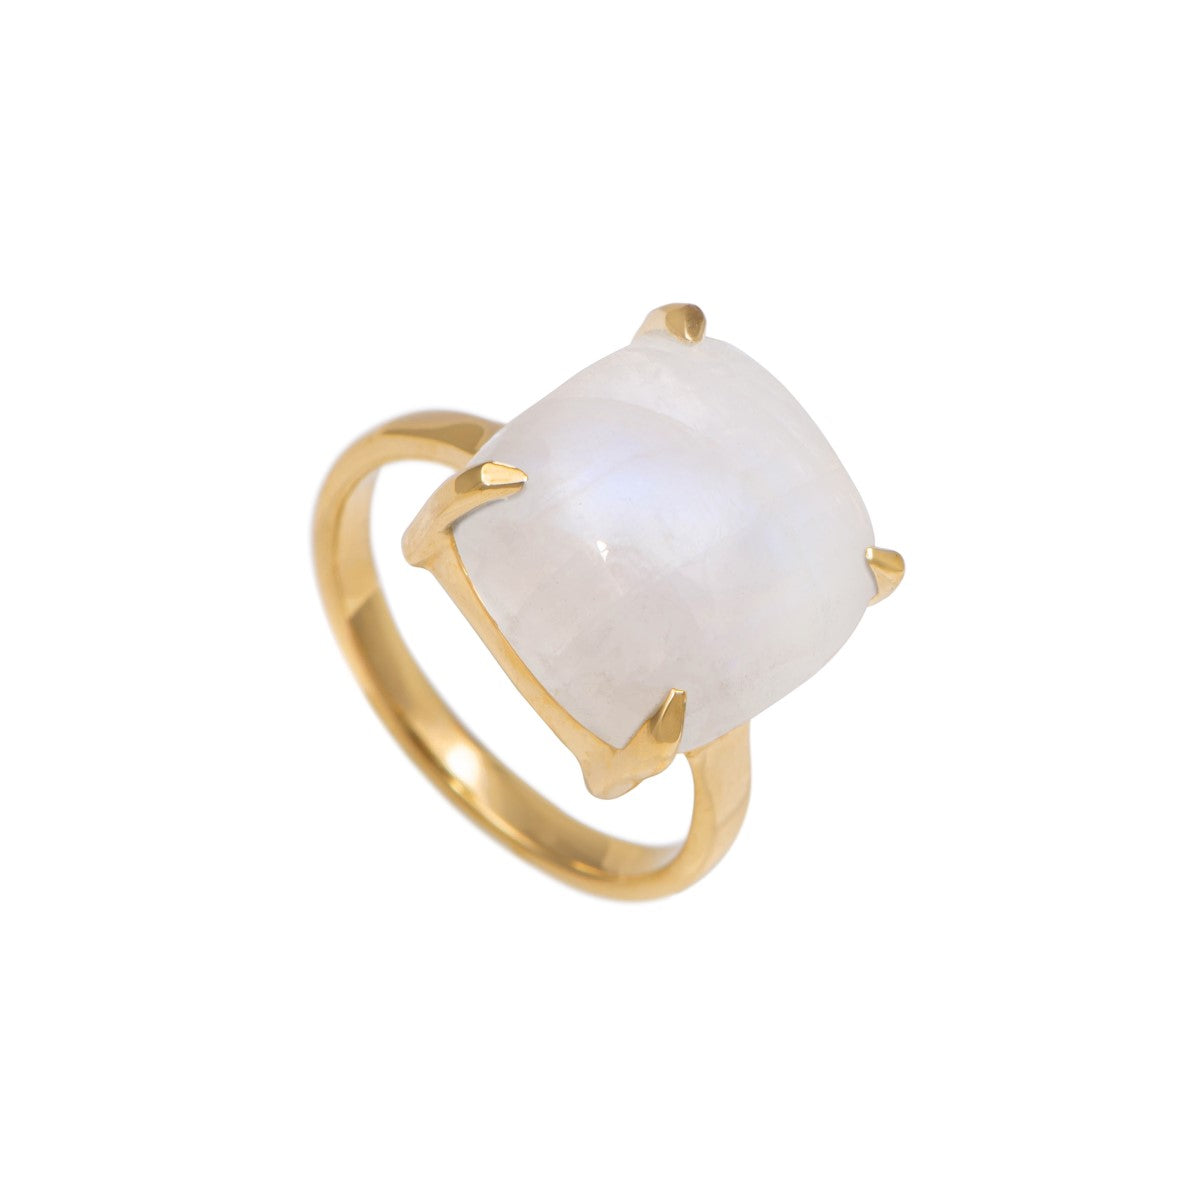 Square Cabochon Moonstone Ring in Gold Plated Sterling Silver